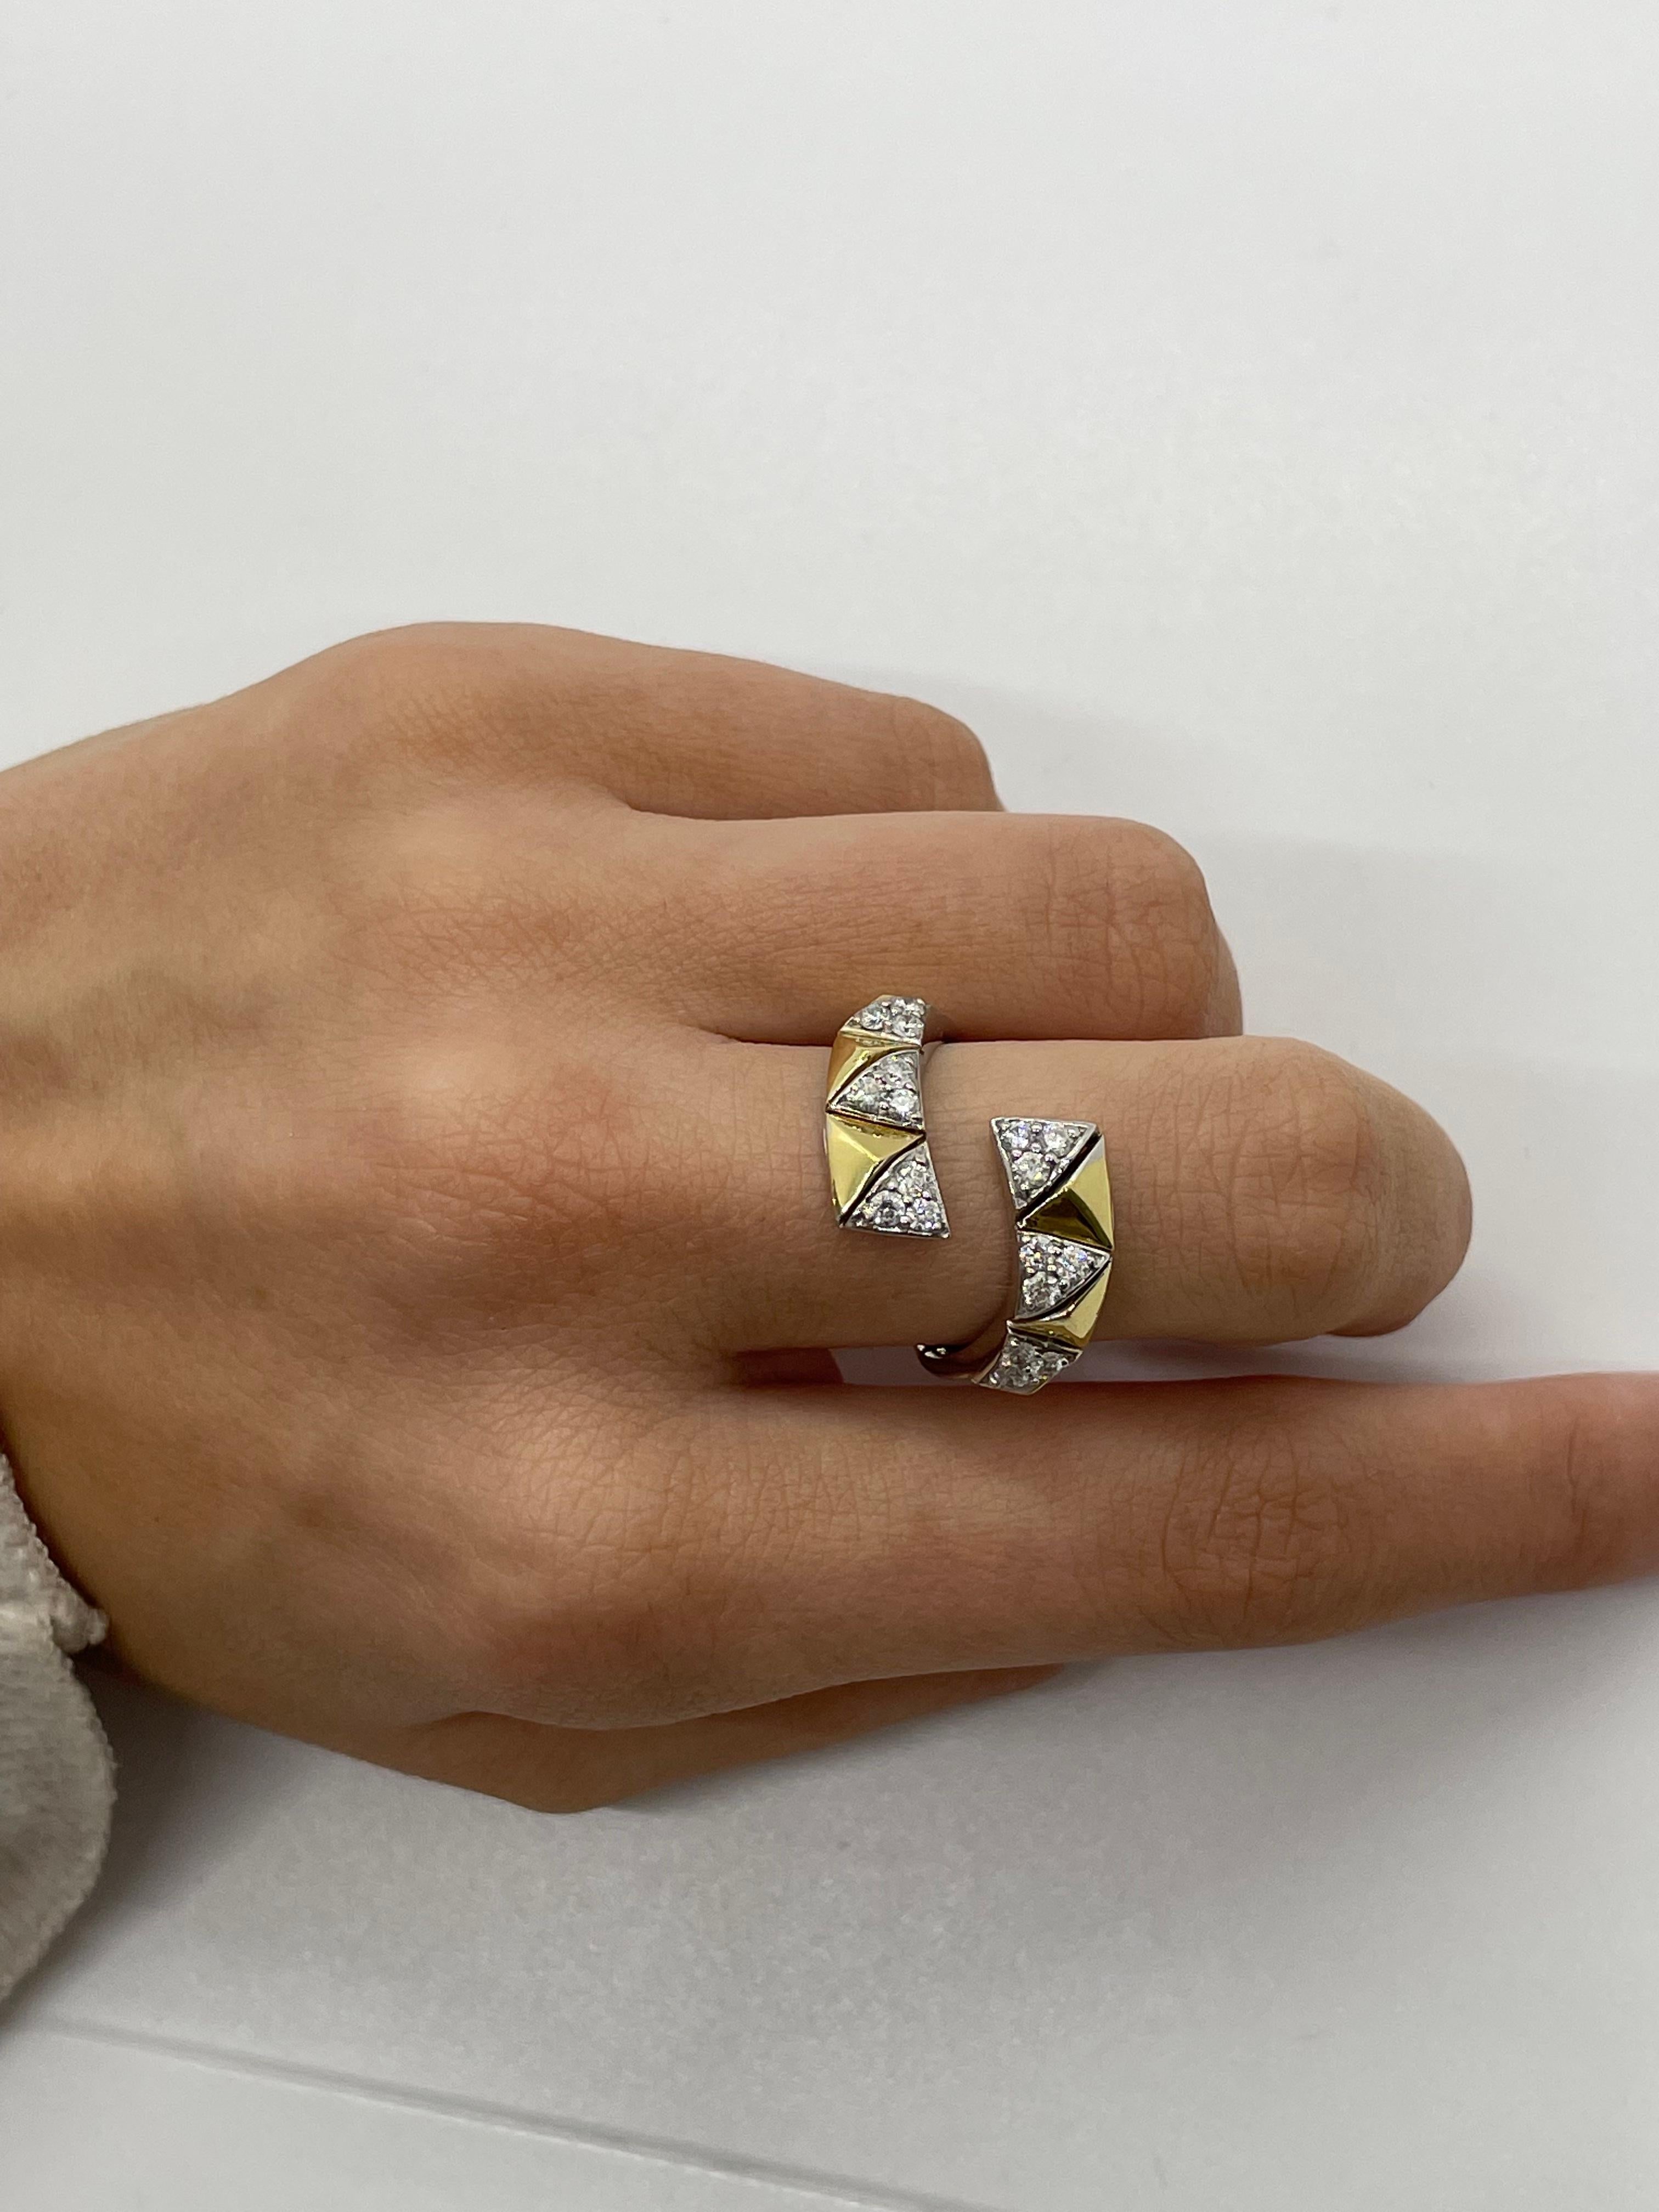 For Sale:  Okre by Yessayan, Pyramid Yellow & White Gold Diamond Ring 2